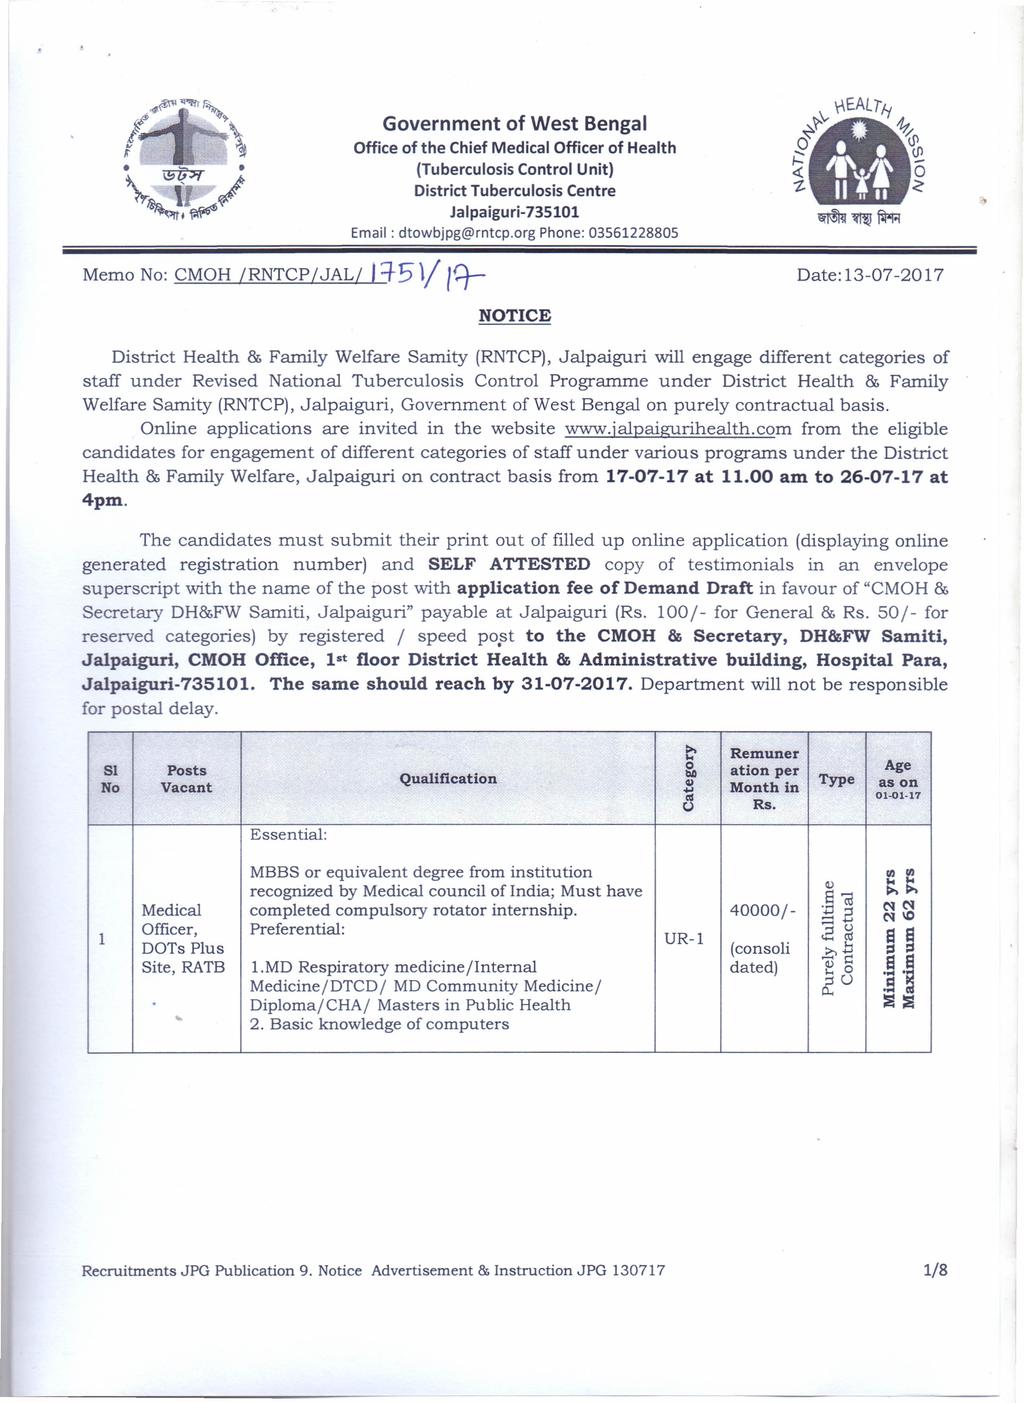 L Memo No: CMOH IRNTCP/JALI Government of West Bengal Office of the Chief Medical Officer of Health (Tuberculosis Control Unit) District Tuberculosis Centre Jalpaiguri-735101 Email: dtowbjpg@rntcp.